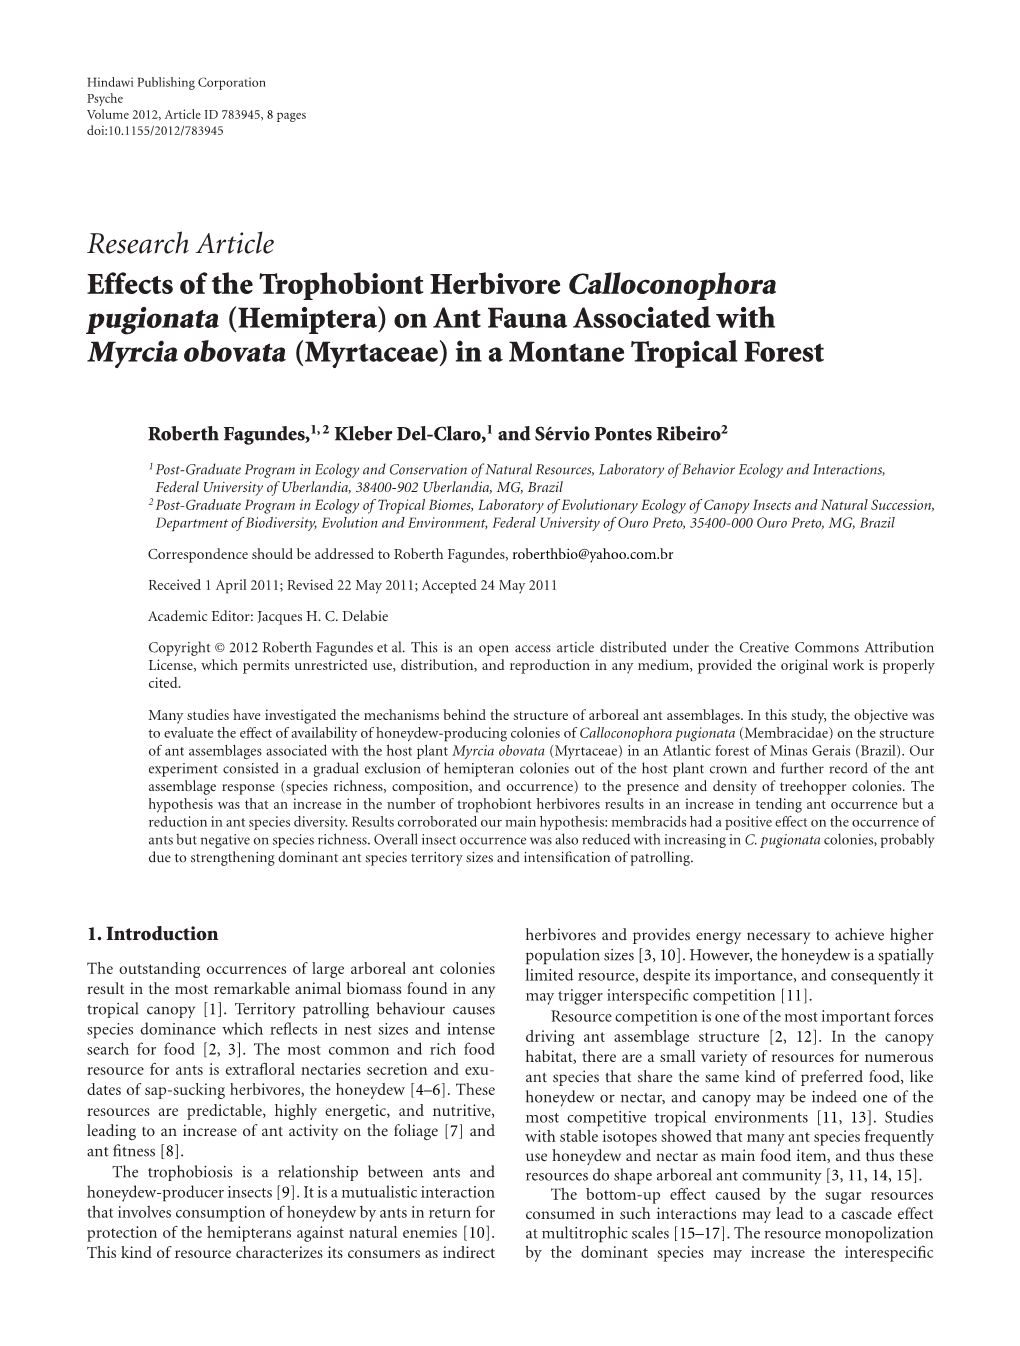 Effects of the Trophobiont Herbivore Calloconophora Pugionata (Hemiptera) on Ant Fauna Associated with Myrcia Obovata (Myrtaceae) in a Montane Tropical Forest